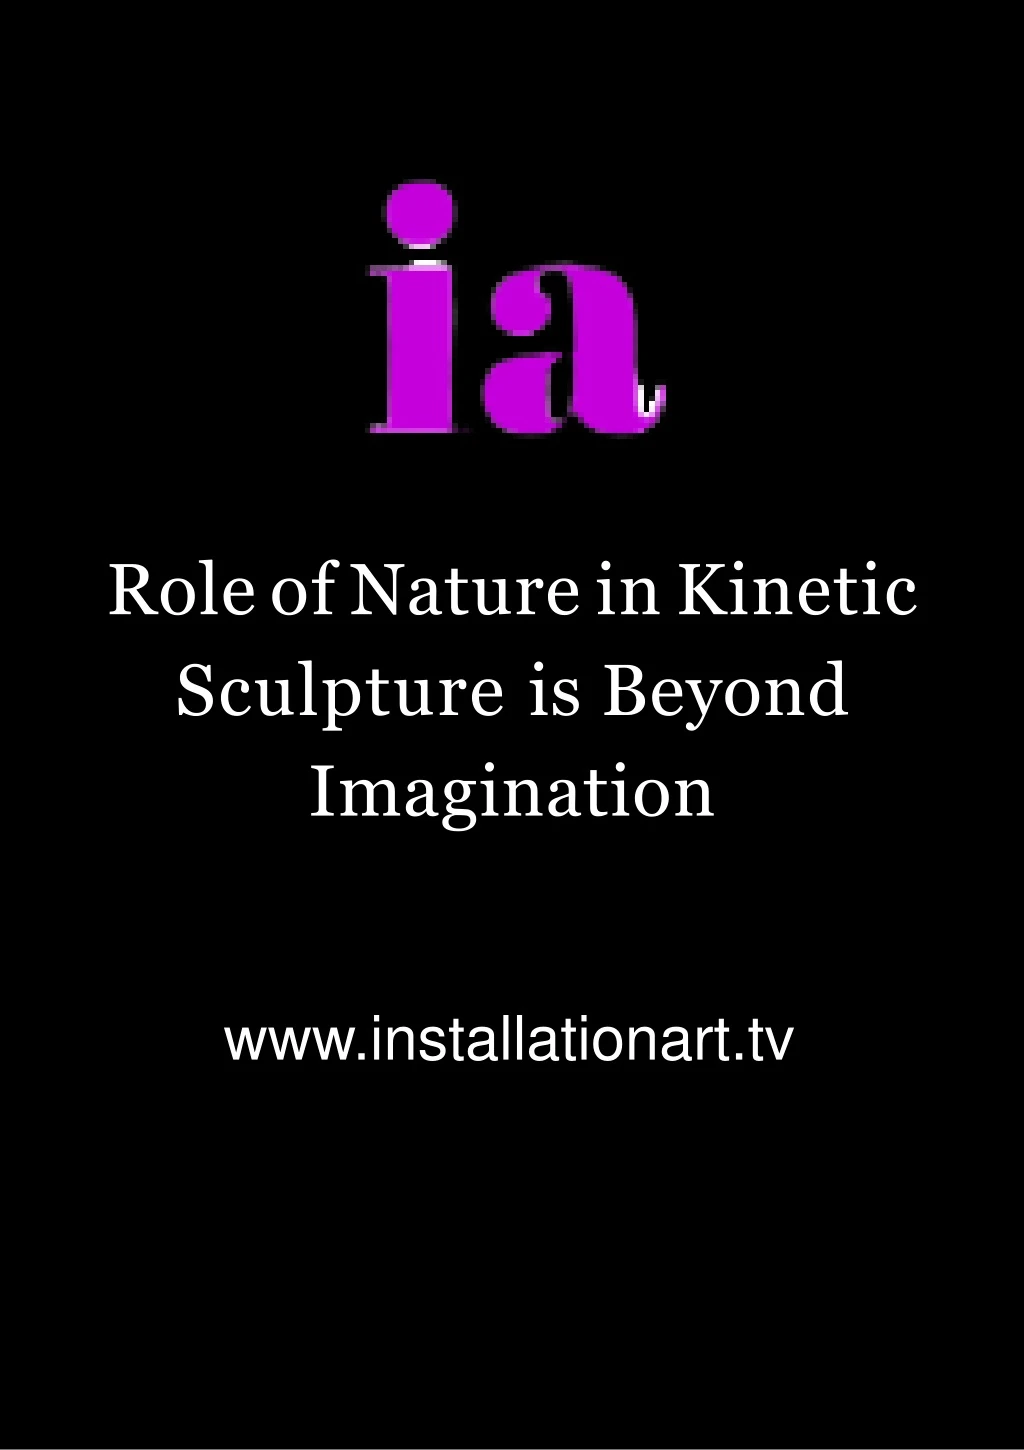 role of nature in kinetic sculpture is beyond imagination